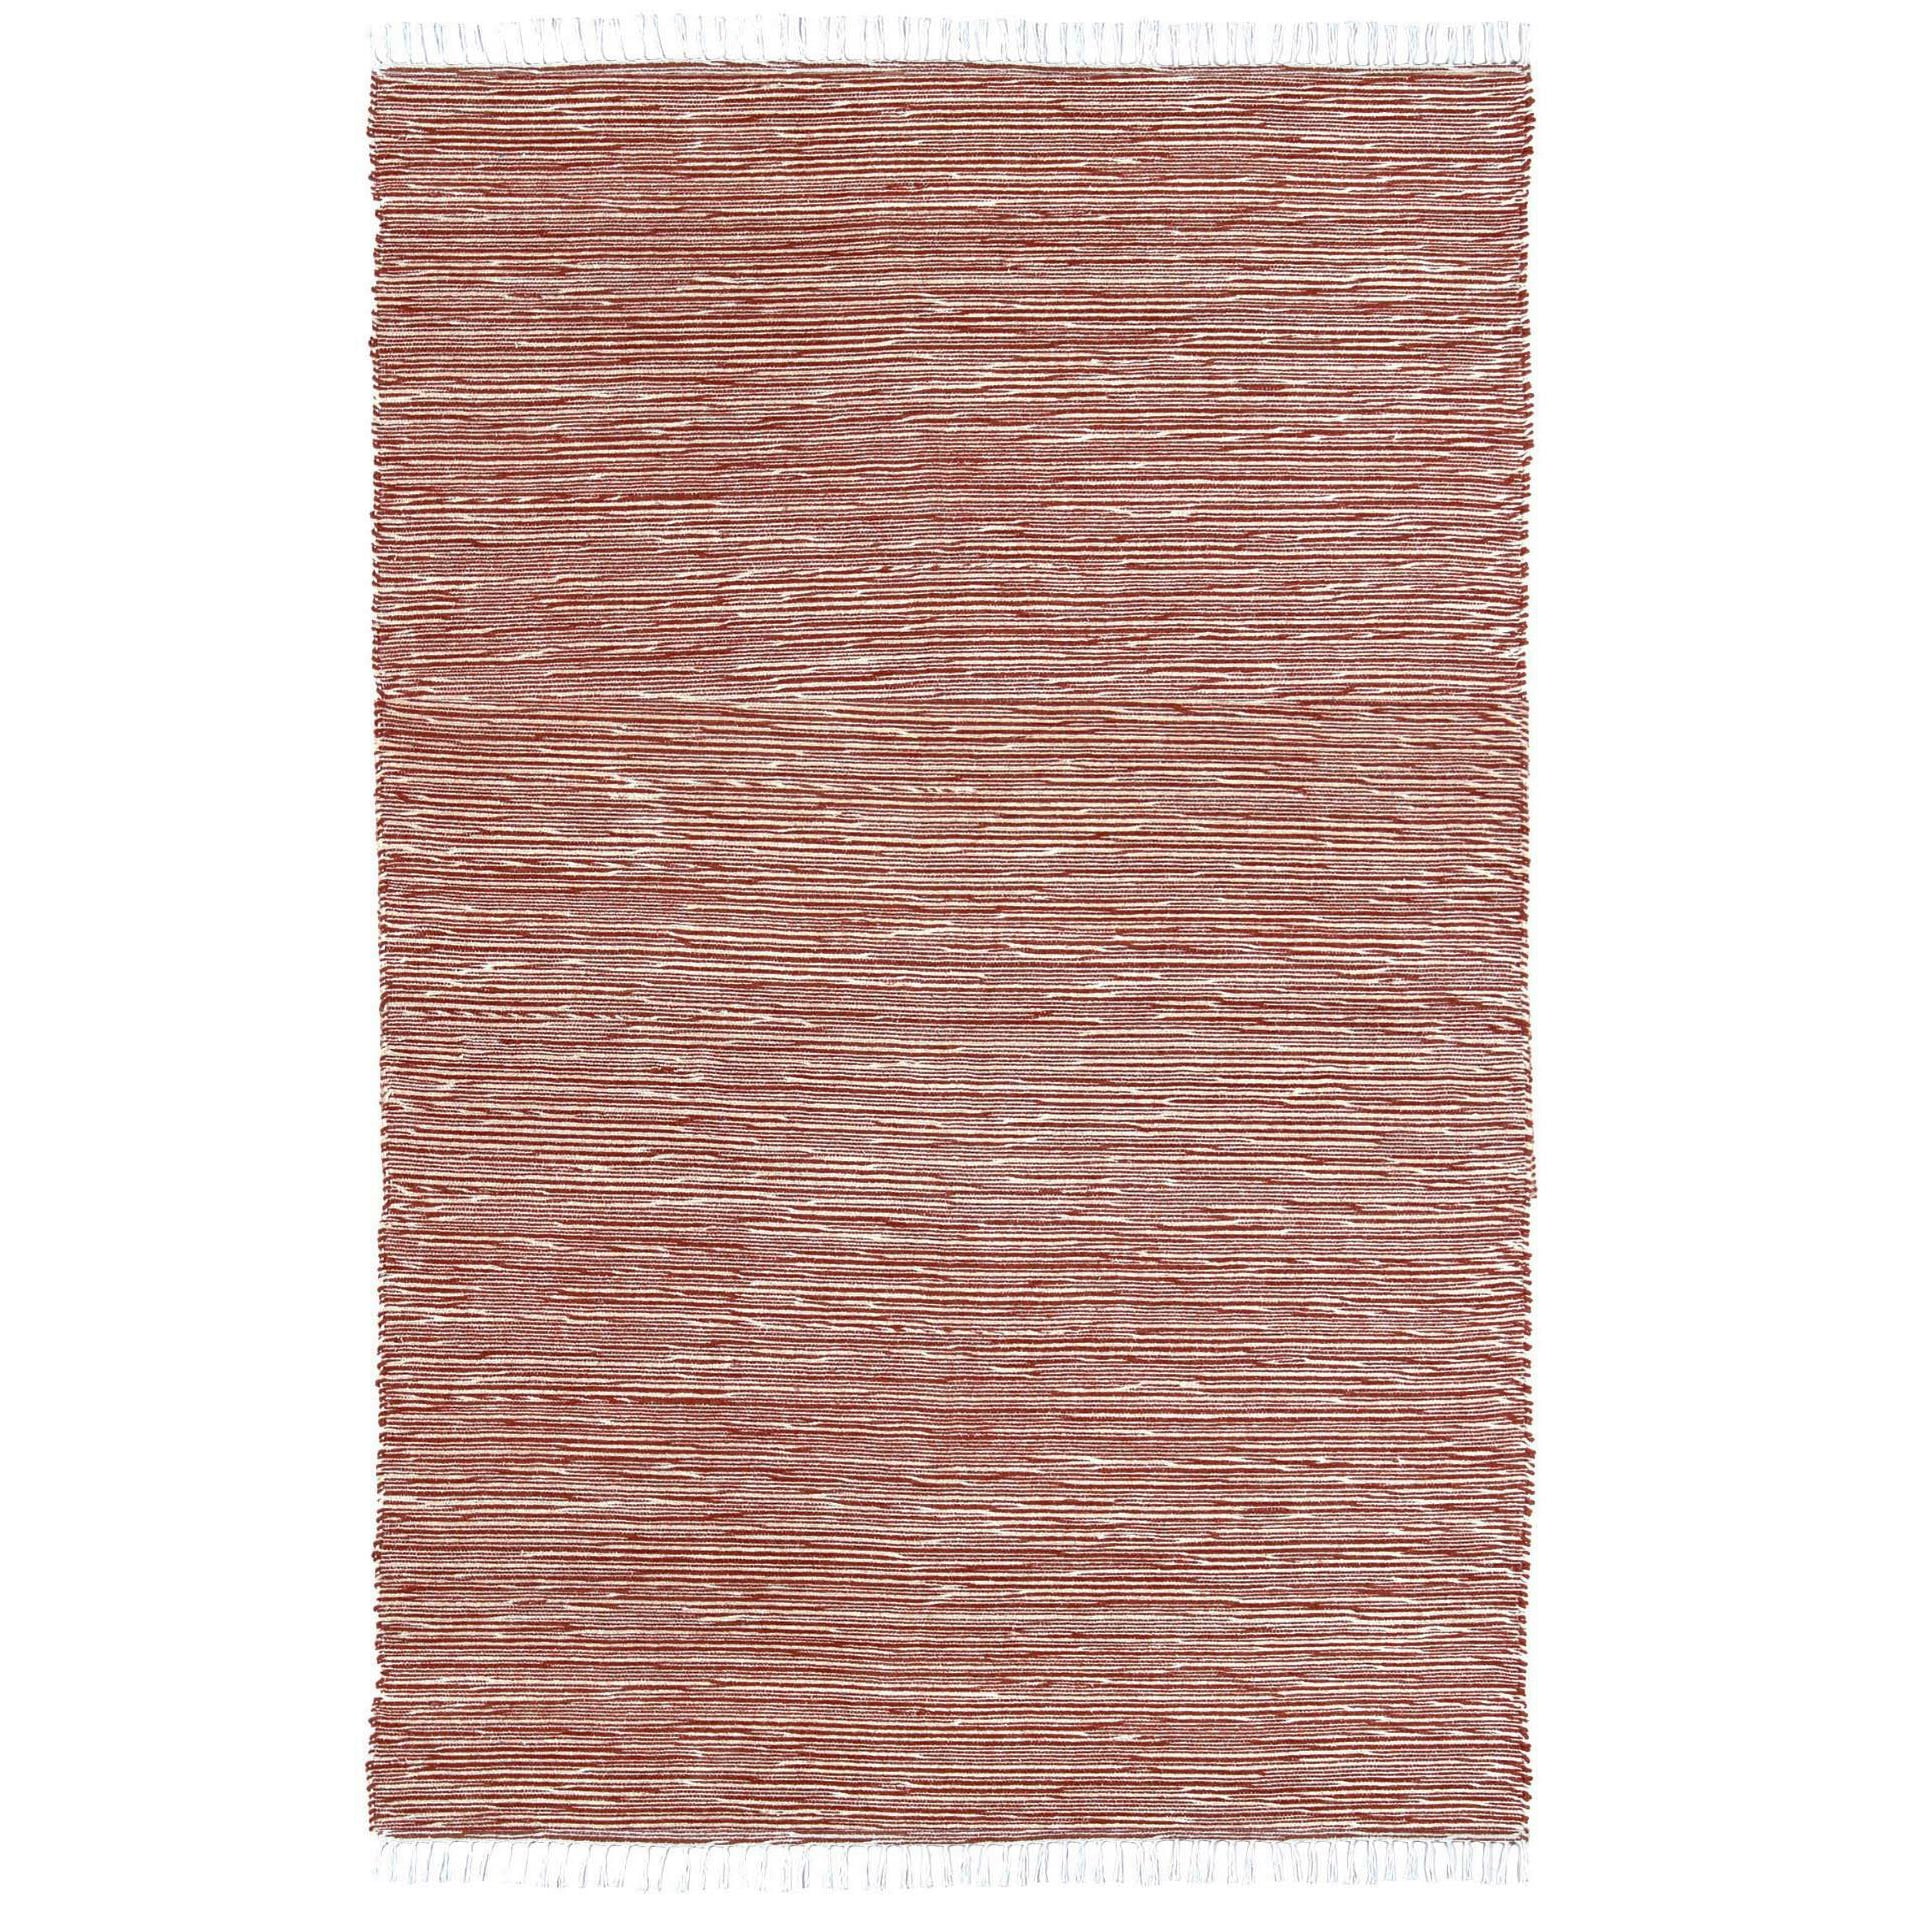 Chenille Flatweave Rug (8 x 10) Today $130.39